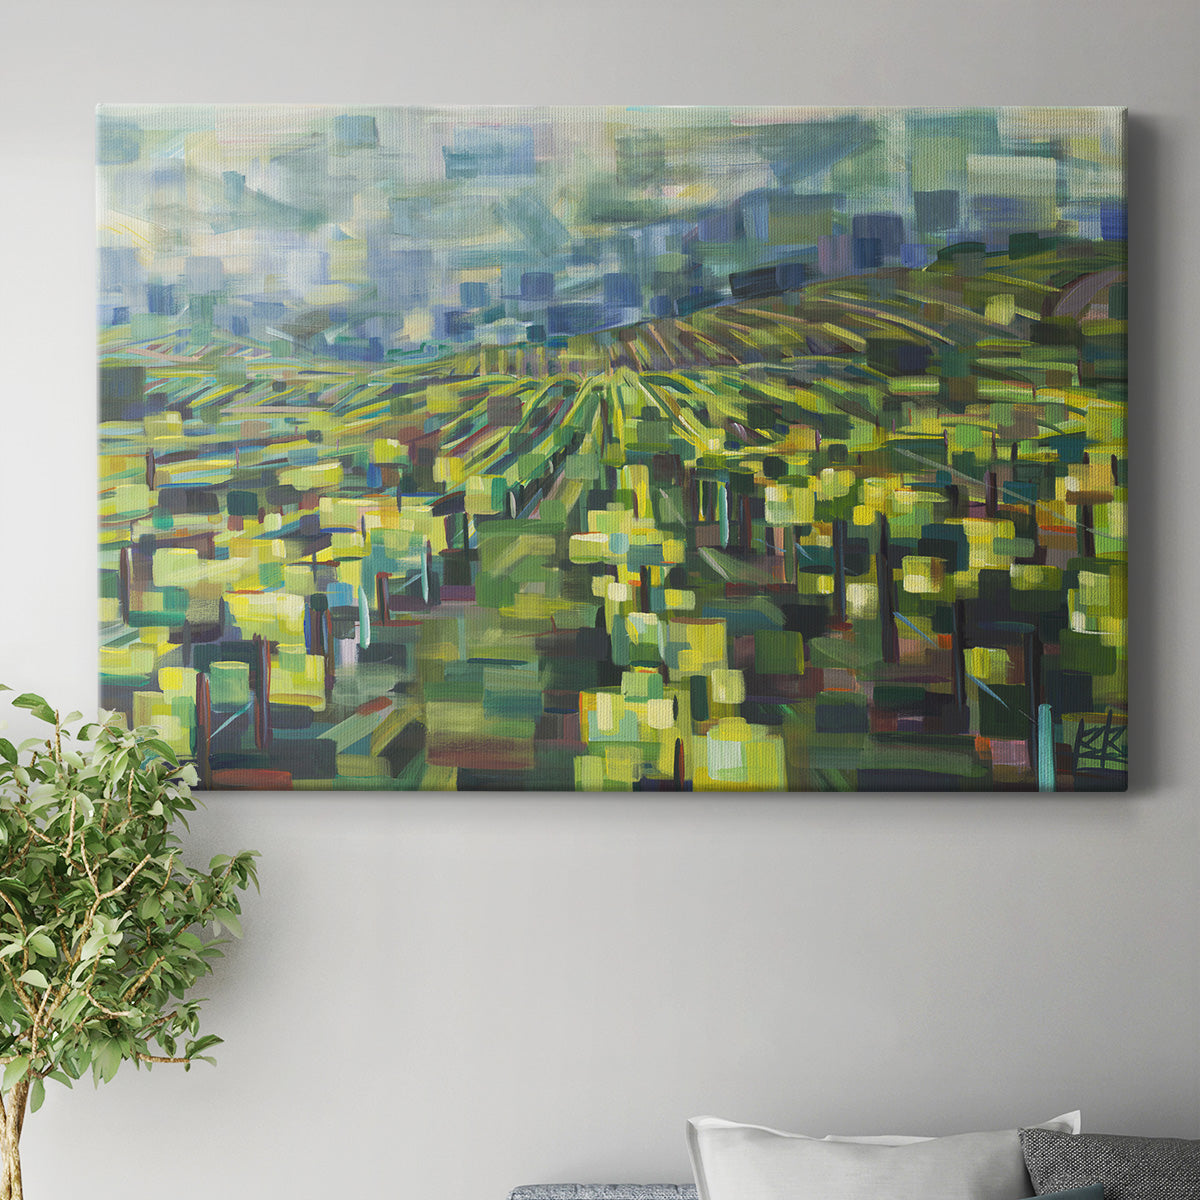 Yellow Grapevines Forever Premium Gallery Wrapped Canvas - Ready to Hang